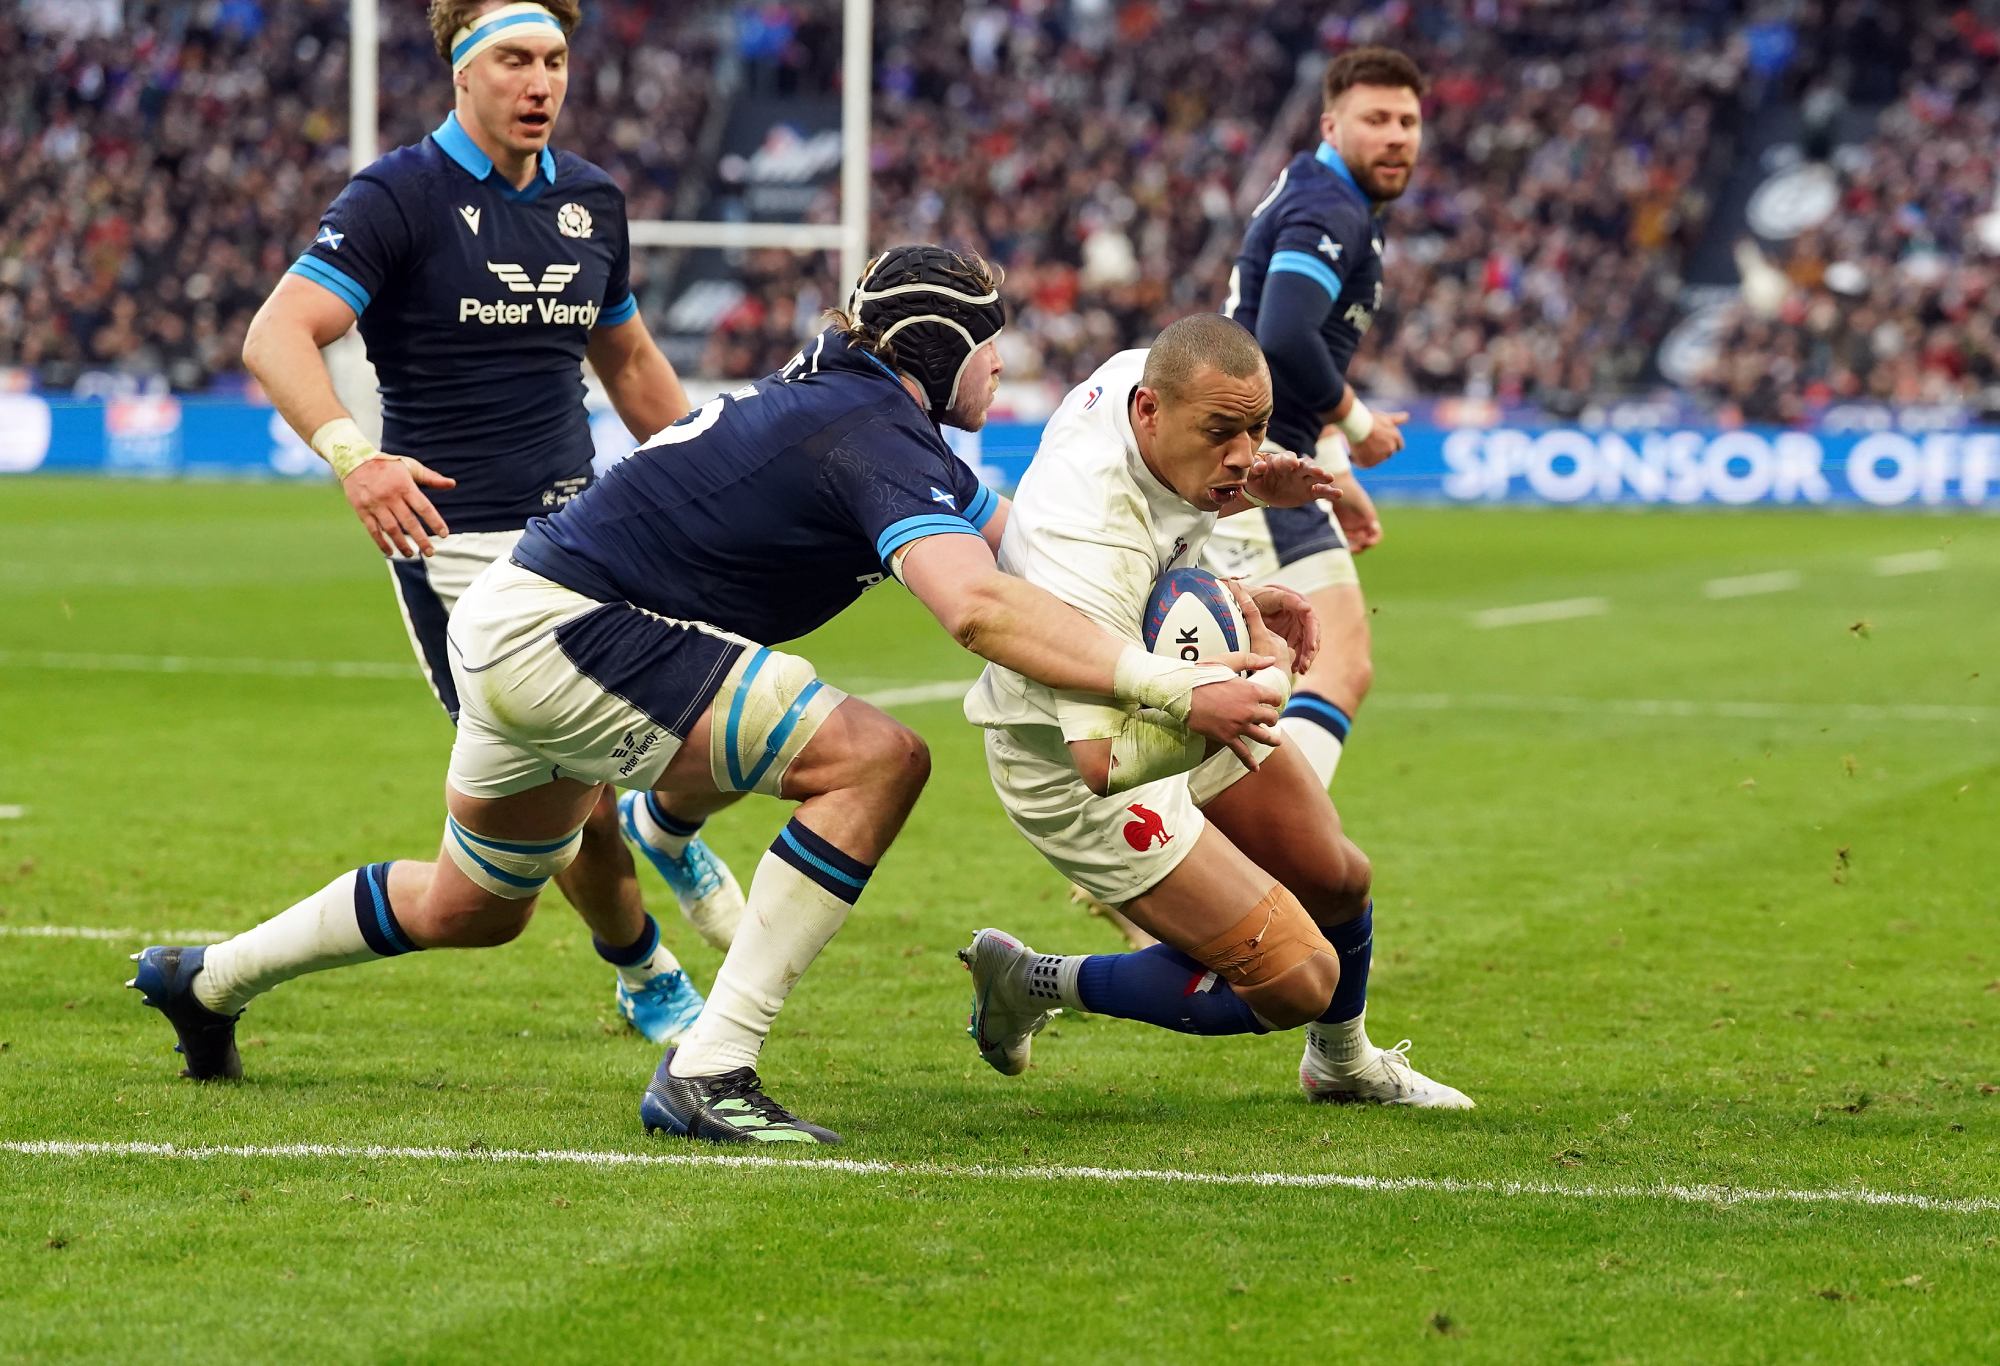 France's Gael Fickou forces his way through the Scotland defence to score a try during the Guinness Six Nations match at the Stade de France, Paris. Picture date: Sunday February 26, 2023. (Photo by Adam Davy/PA Images via Getty Images)